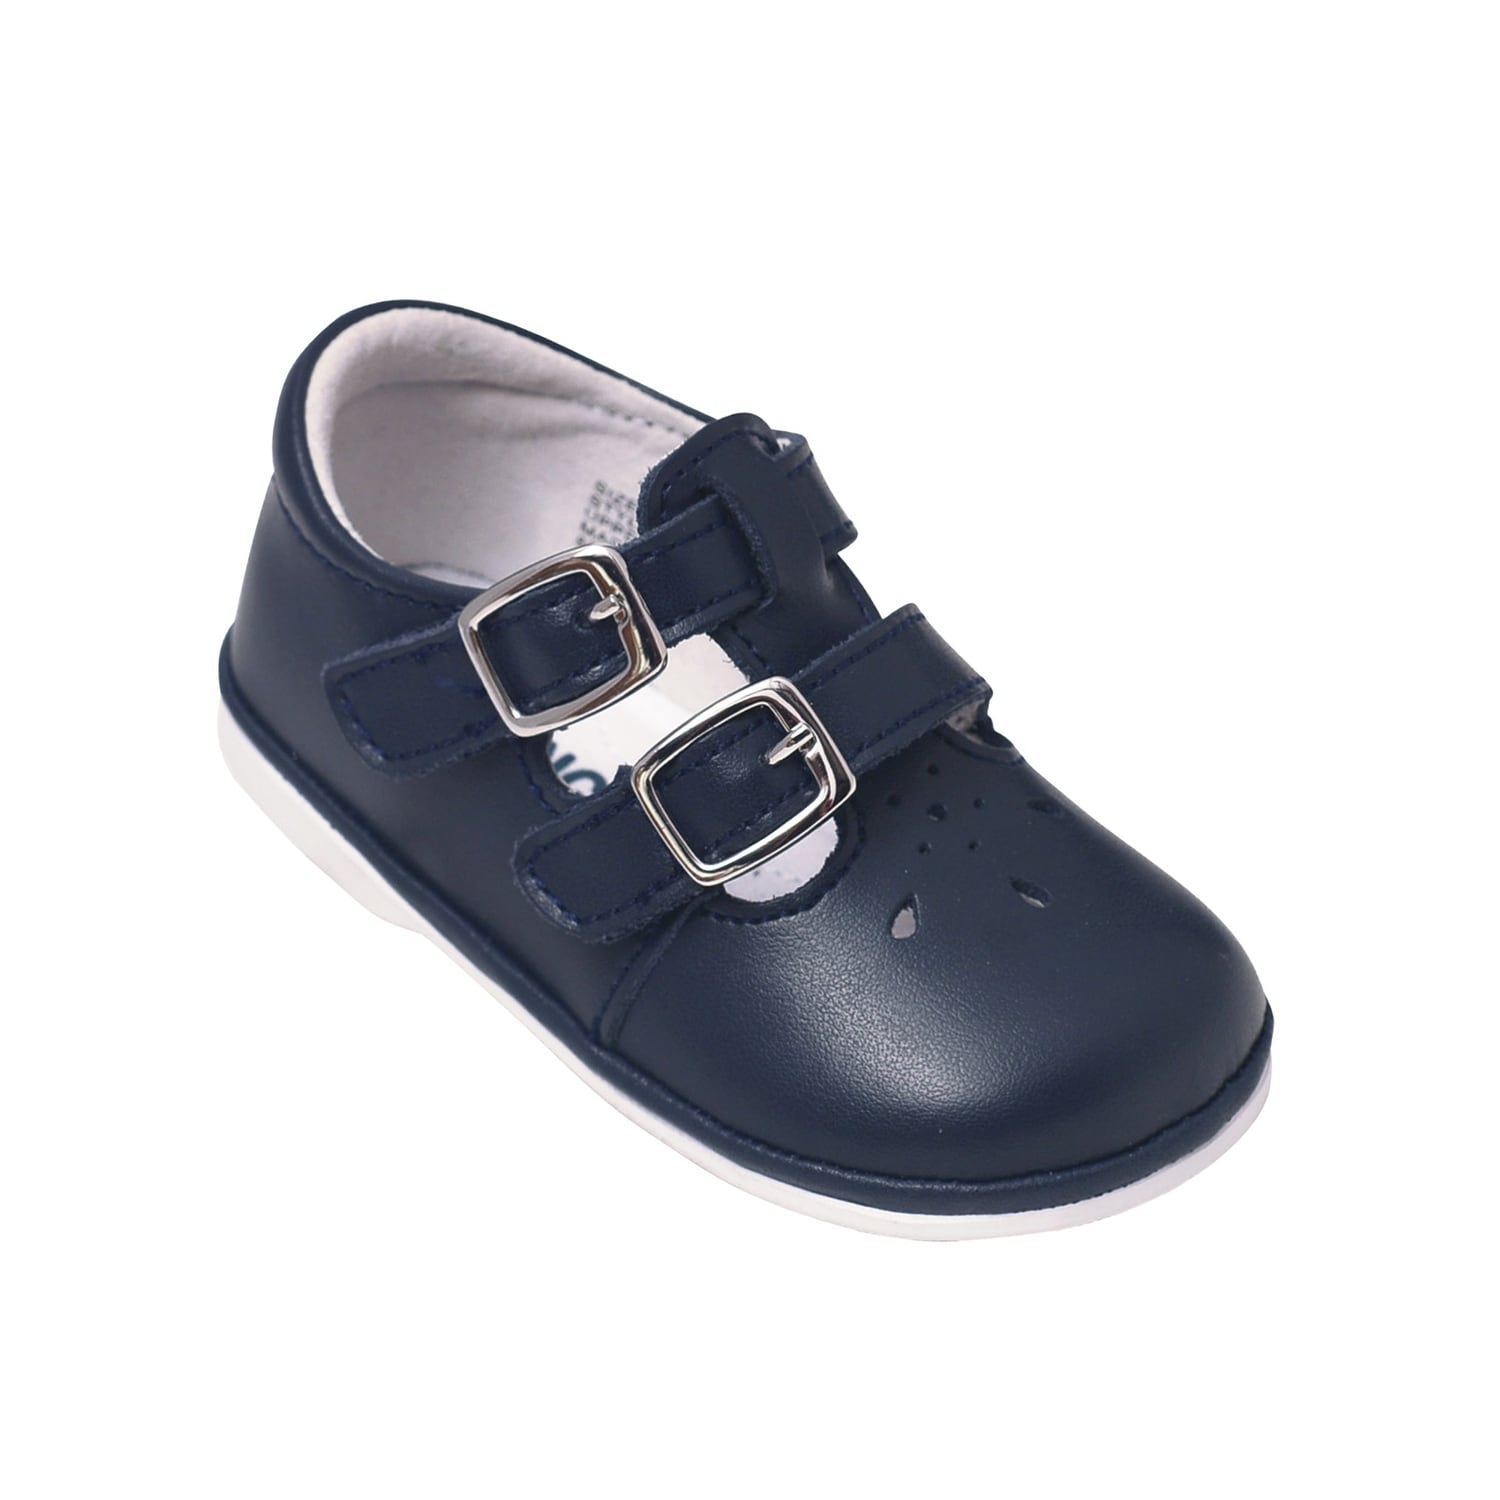 mary jane shoes navy blue